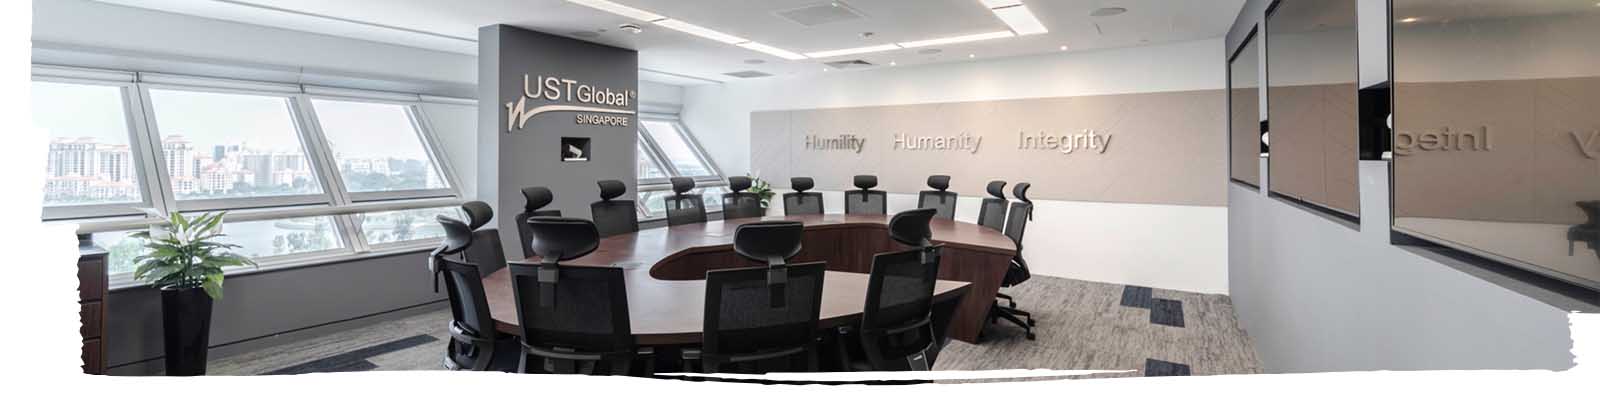 UST Global Tech player new meeting room